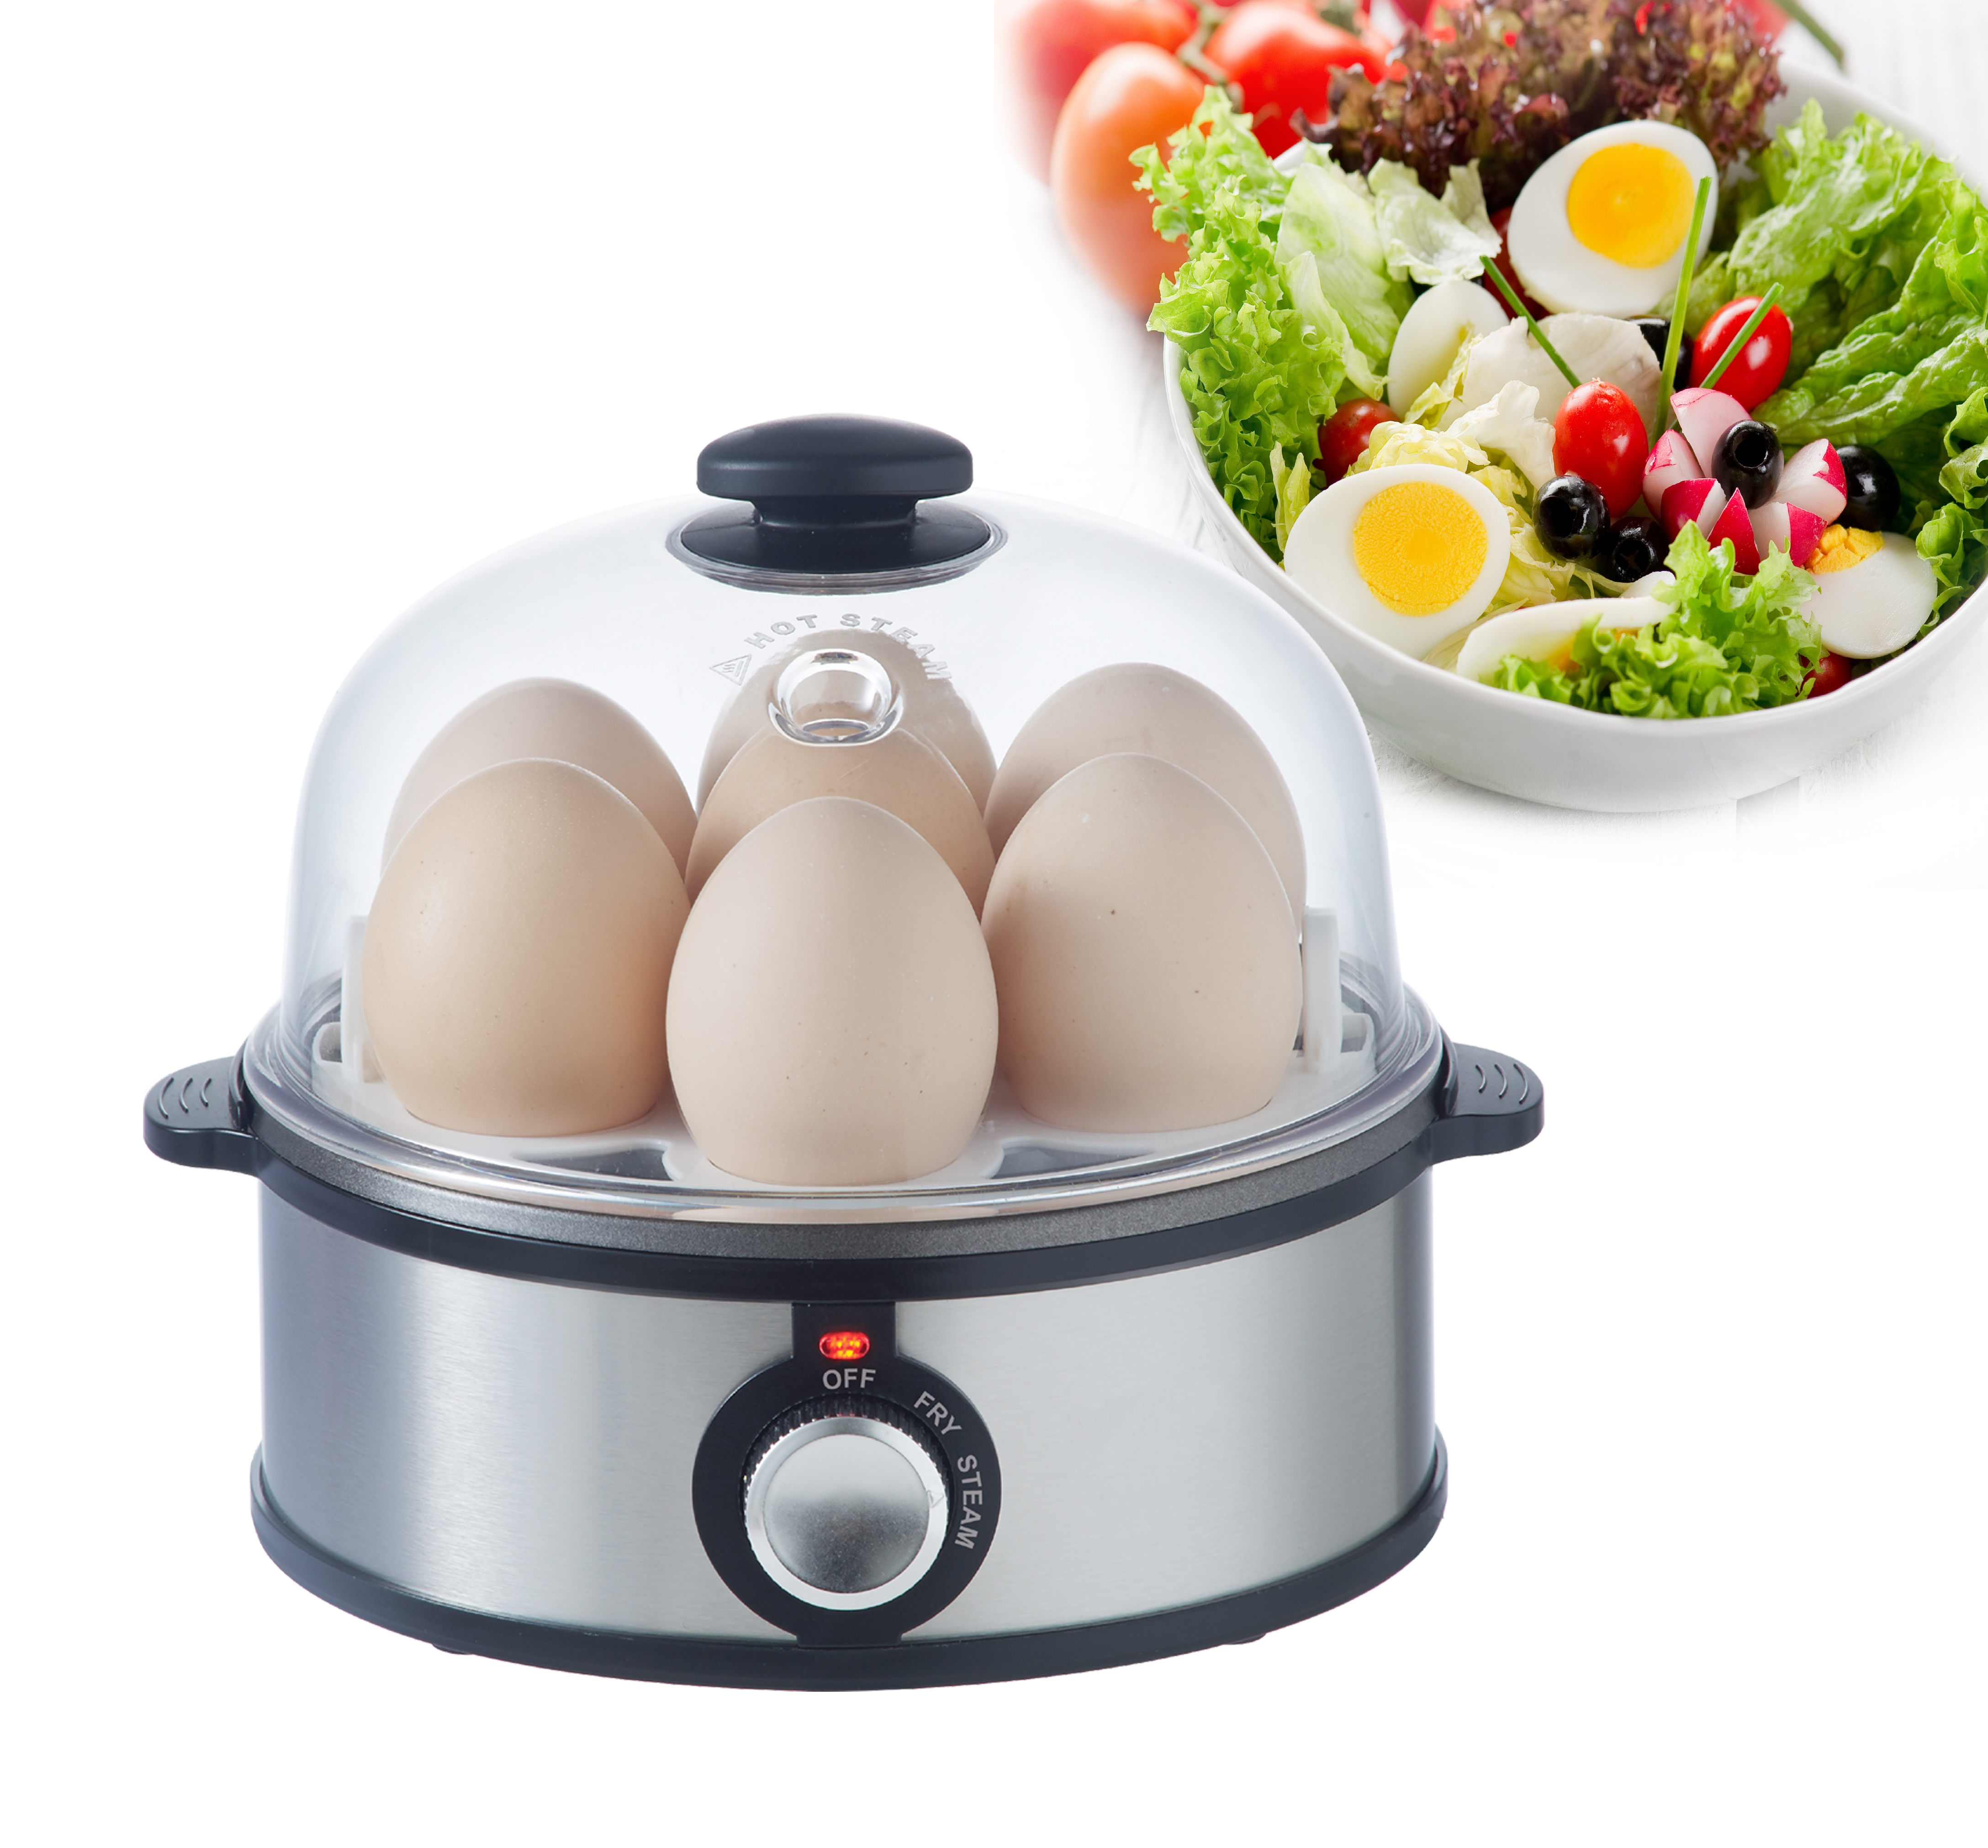  7eggs capacity egg boiler for steamer with 360W wattage and fry egg with 180W wattage function